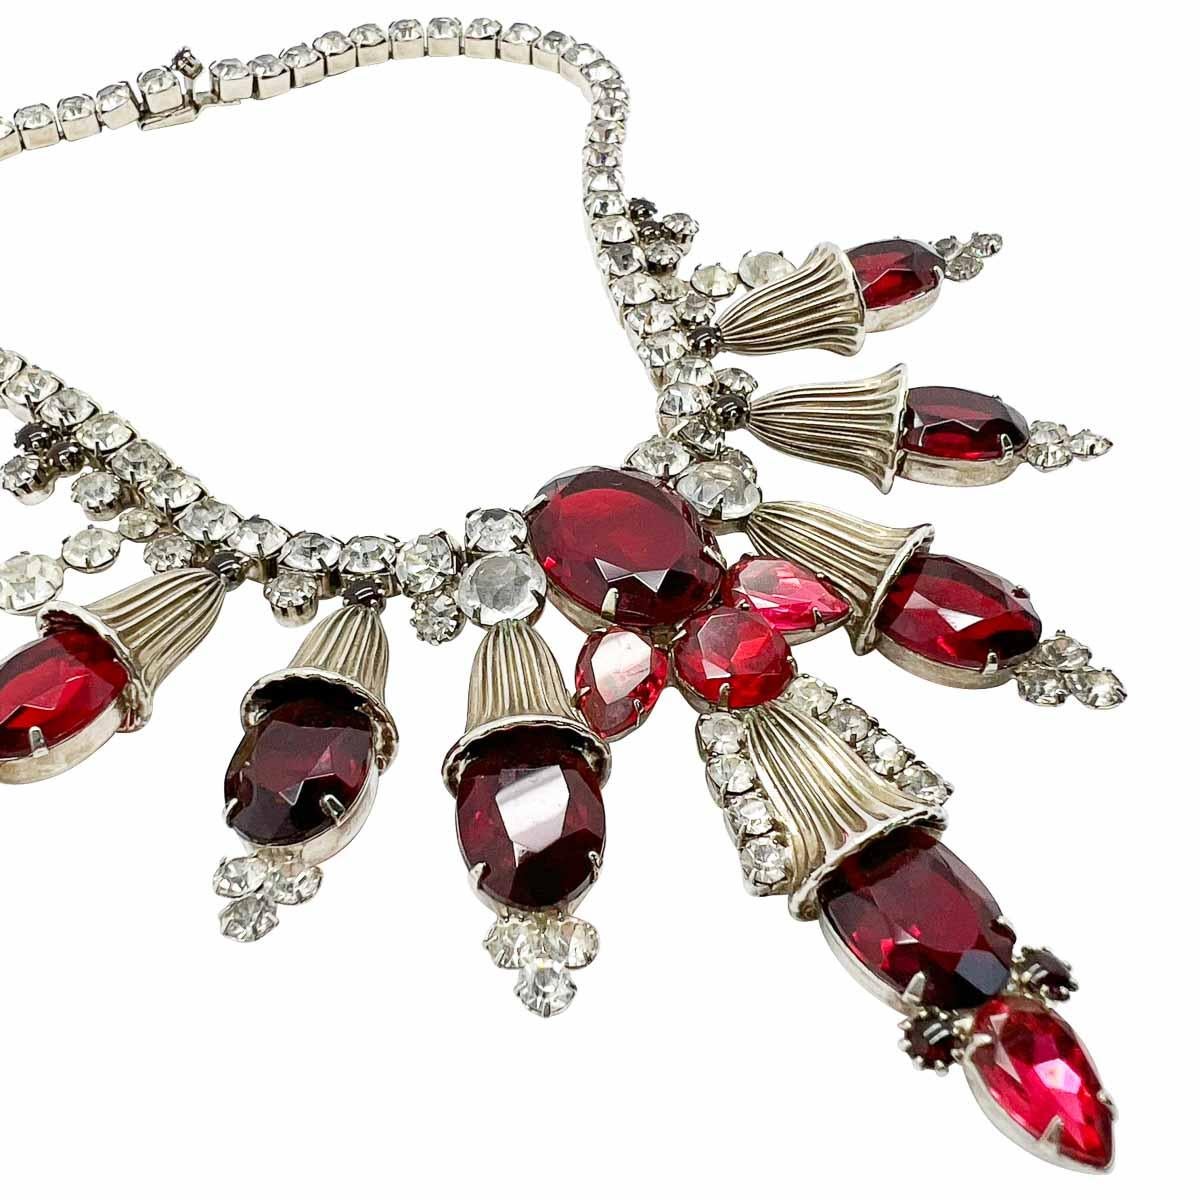 A magnificent Vintage Ruby Statement Collar. Clever design incorporates large ruby glass stones amongst grand metal motifs whilst leaving no detail to chance. Right down to the tiny ruby glass cabochon stones in the clasp and midway. The resulting